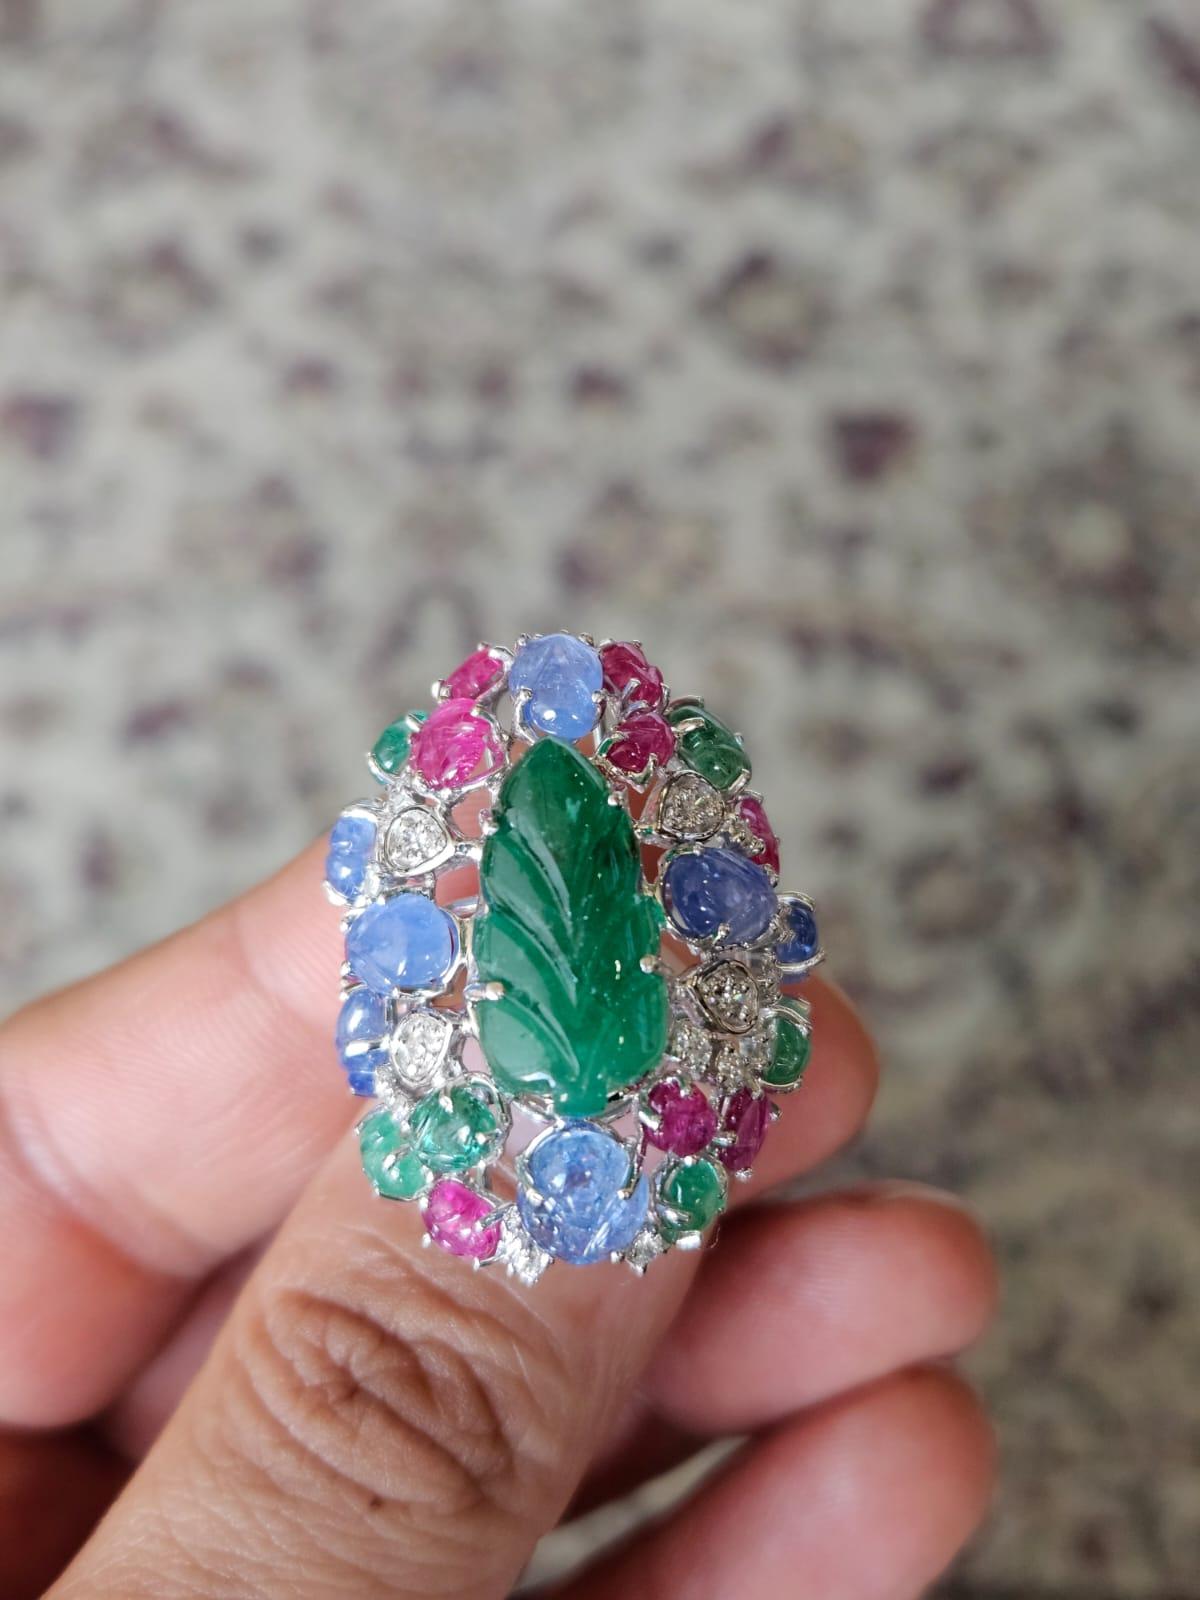 A very gorgeous and beautiful, Blue Sapphires, Emeralds, Rubies Tutti Frutti Cocktail Ring set in 18K White Gold & Diamonds. The weight of the carved Emerald is 6.39 carats. The Emerald is completely natural, without any treatment and is of Zambian